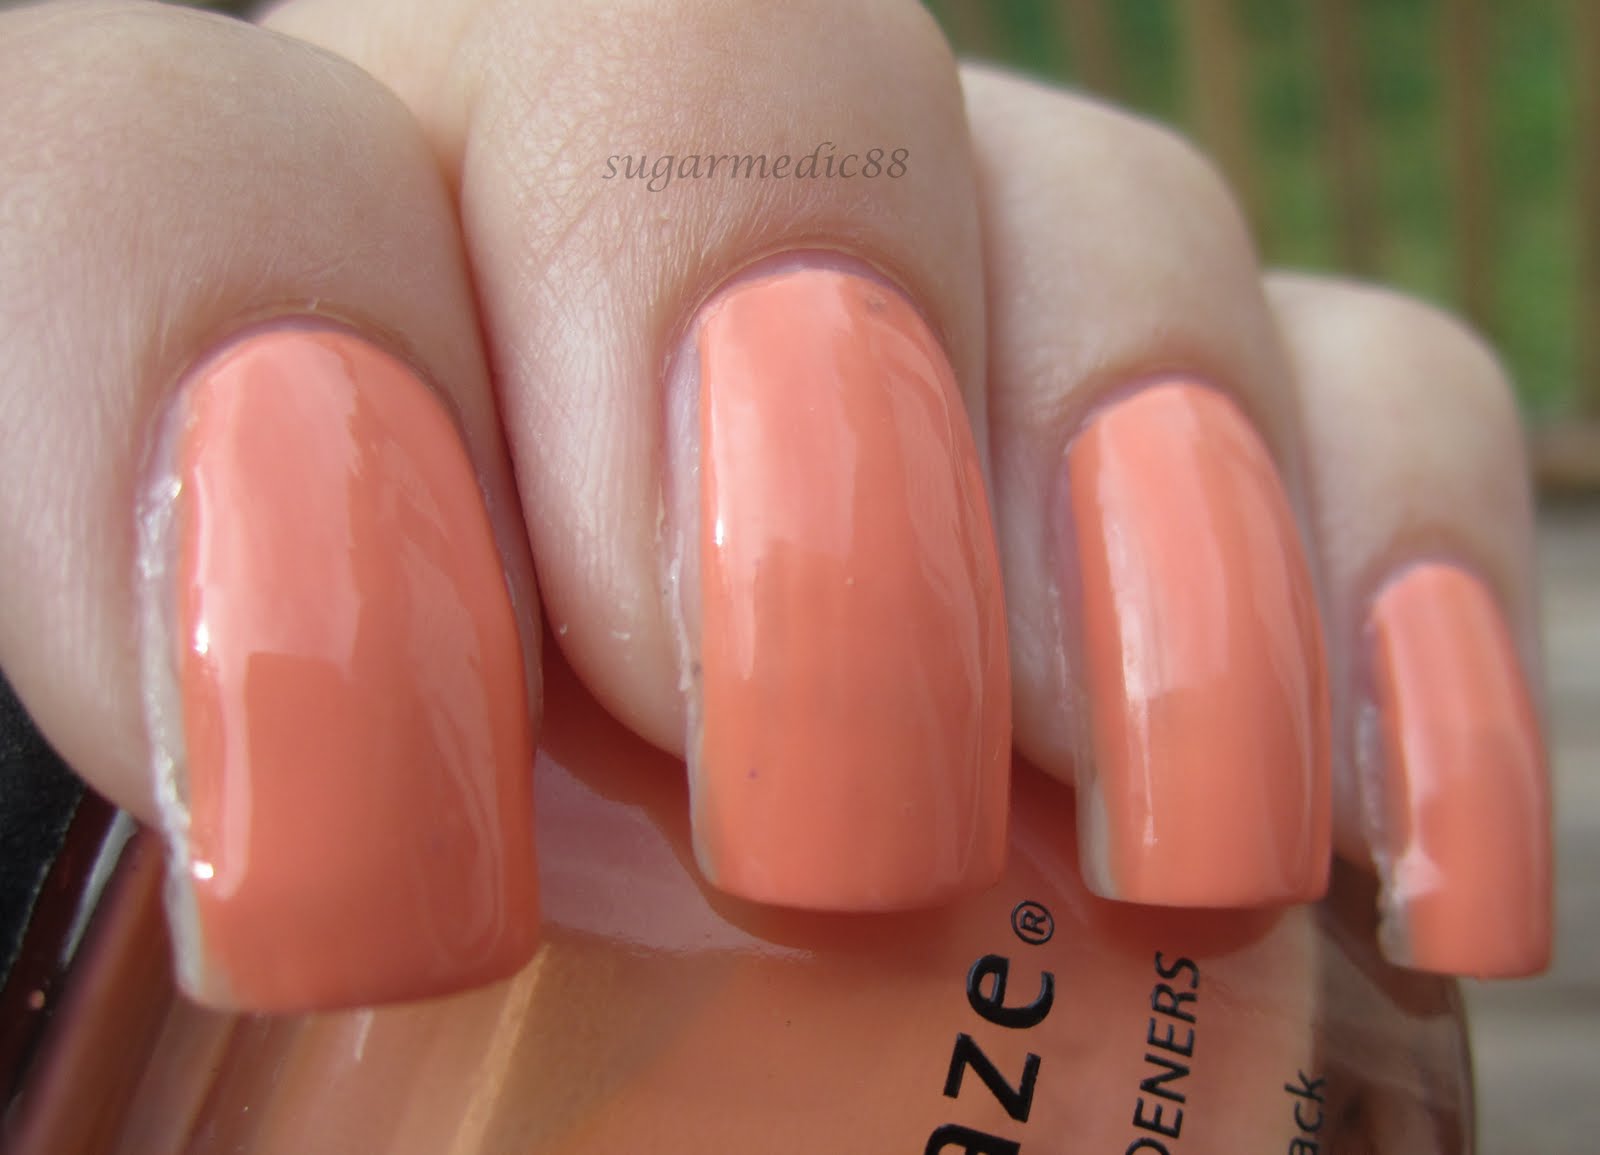 4. China Glaze Nail Lacquer in "Peachy Keen" - wide 7